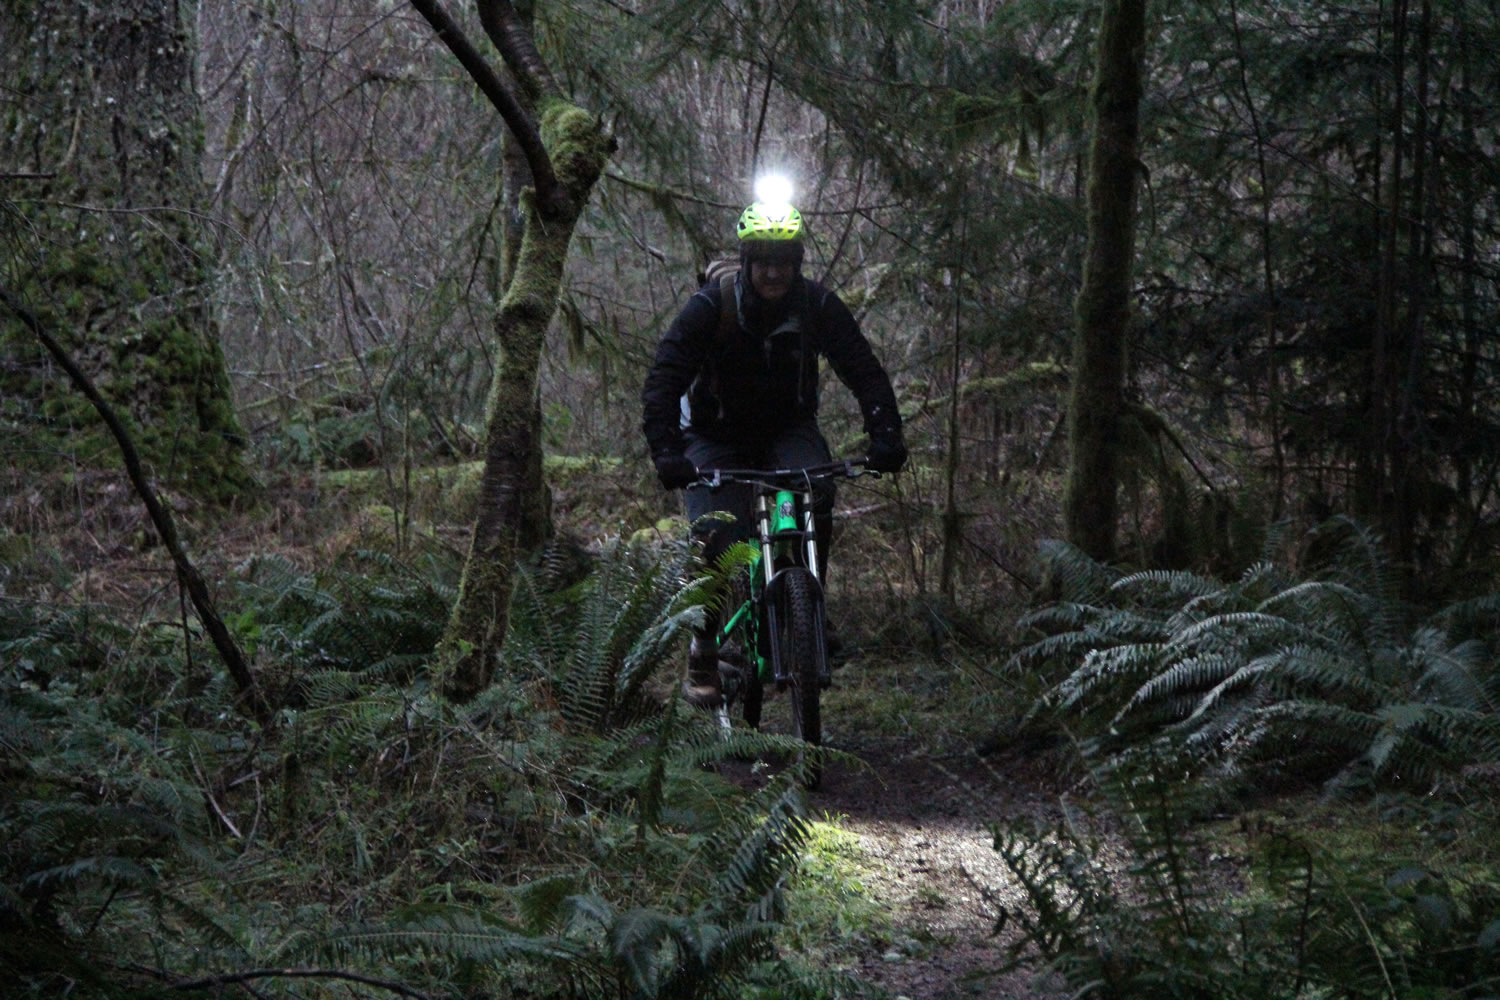 Riding at night adds a whole new elemental to mountain bike use.